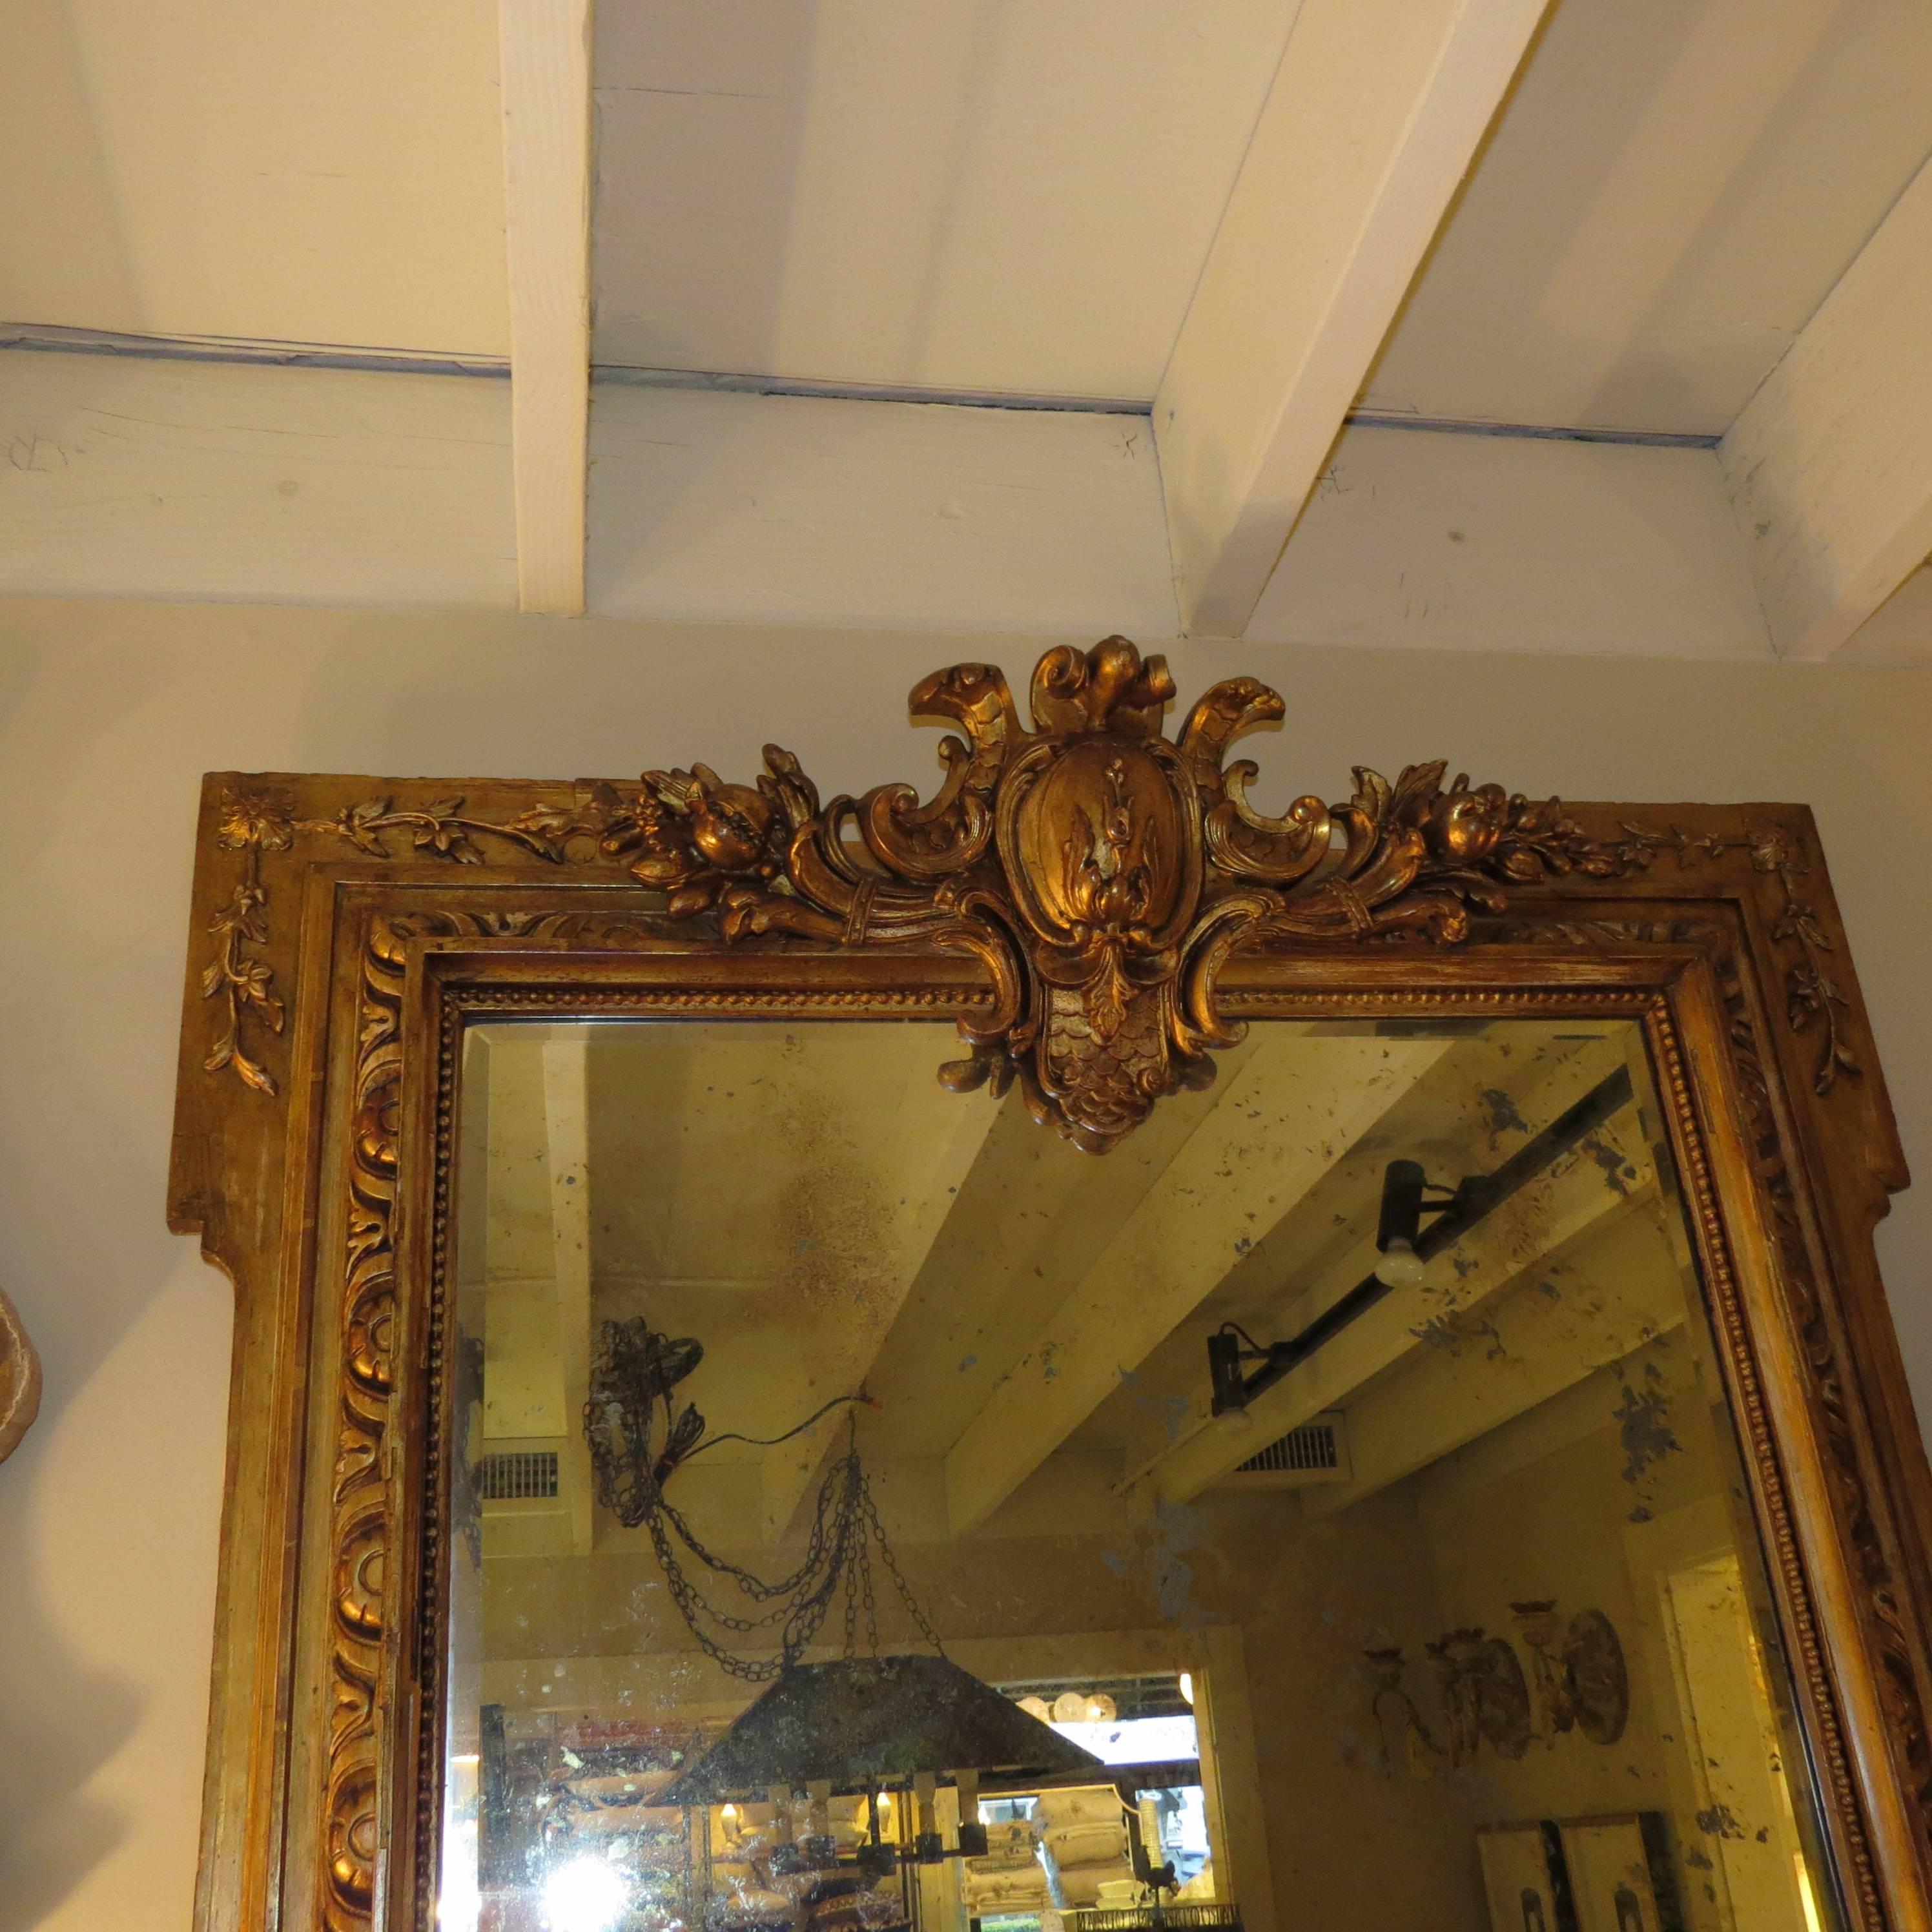 Ornate 19th century French, gilt frame hold a more recent, distressed mirror. Mirror is mottled on back side, no defects in front surface.